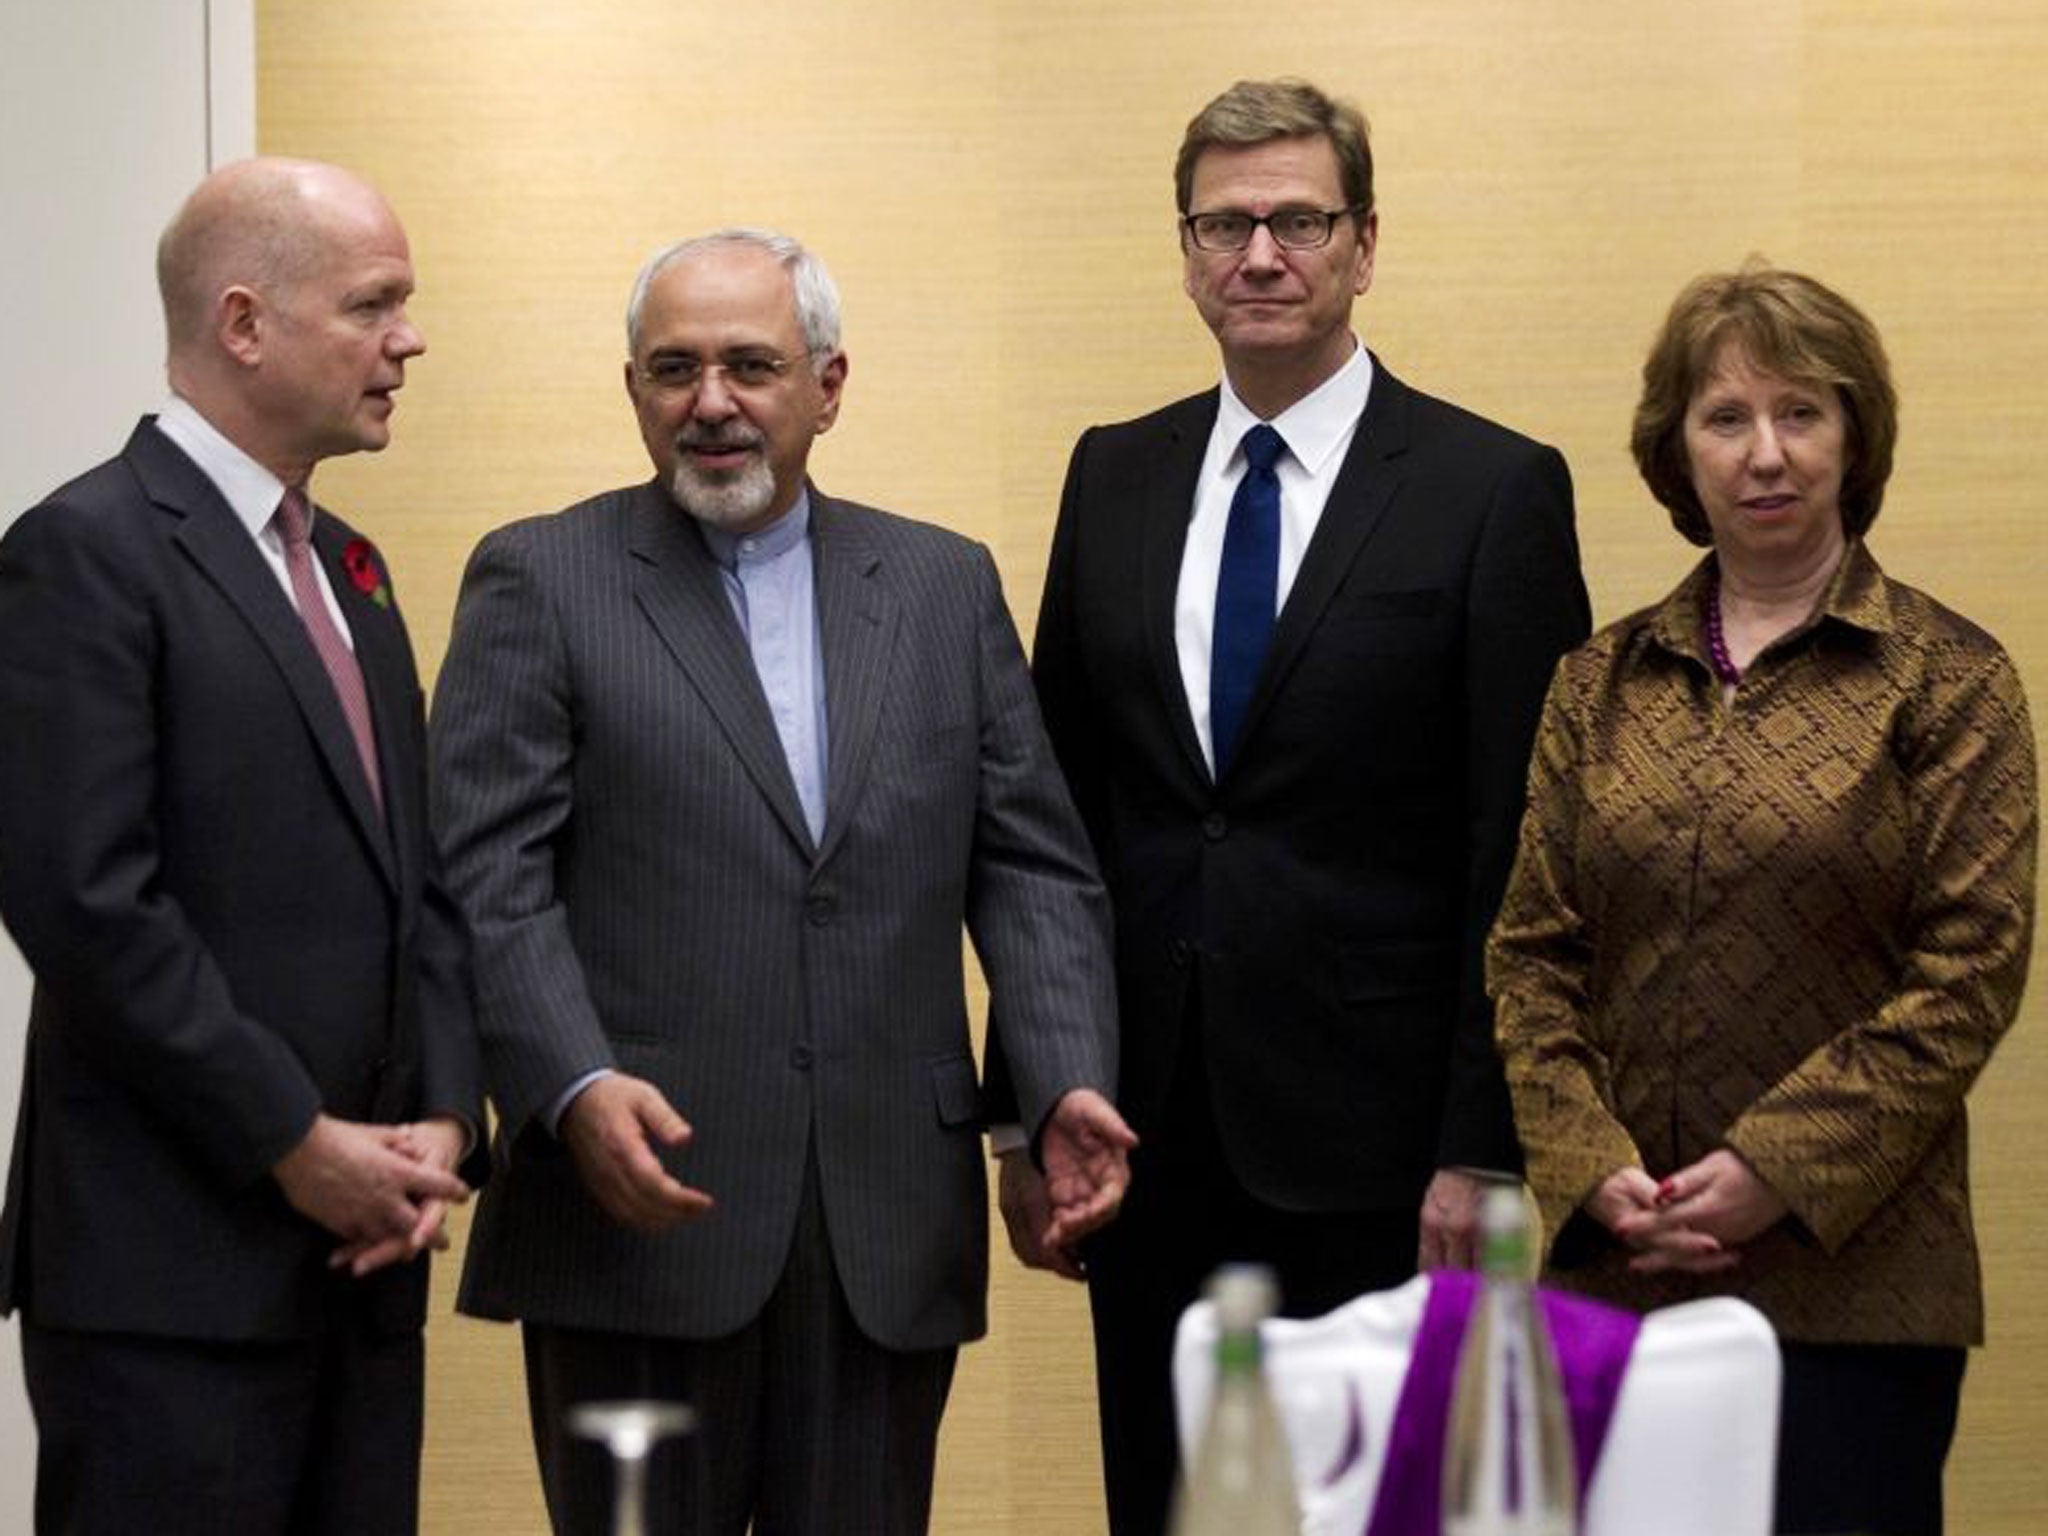 (Left to right) Foreign Secretary William Hague, with Iranian Foreign Minister Mohammad Javad Zarif, Germany's Foreign Minister Guido Westerwelle, and top EU diplomat Catherine Ashton